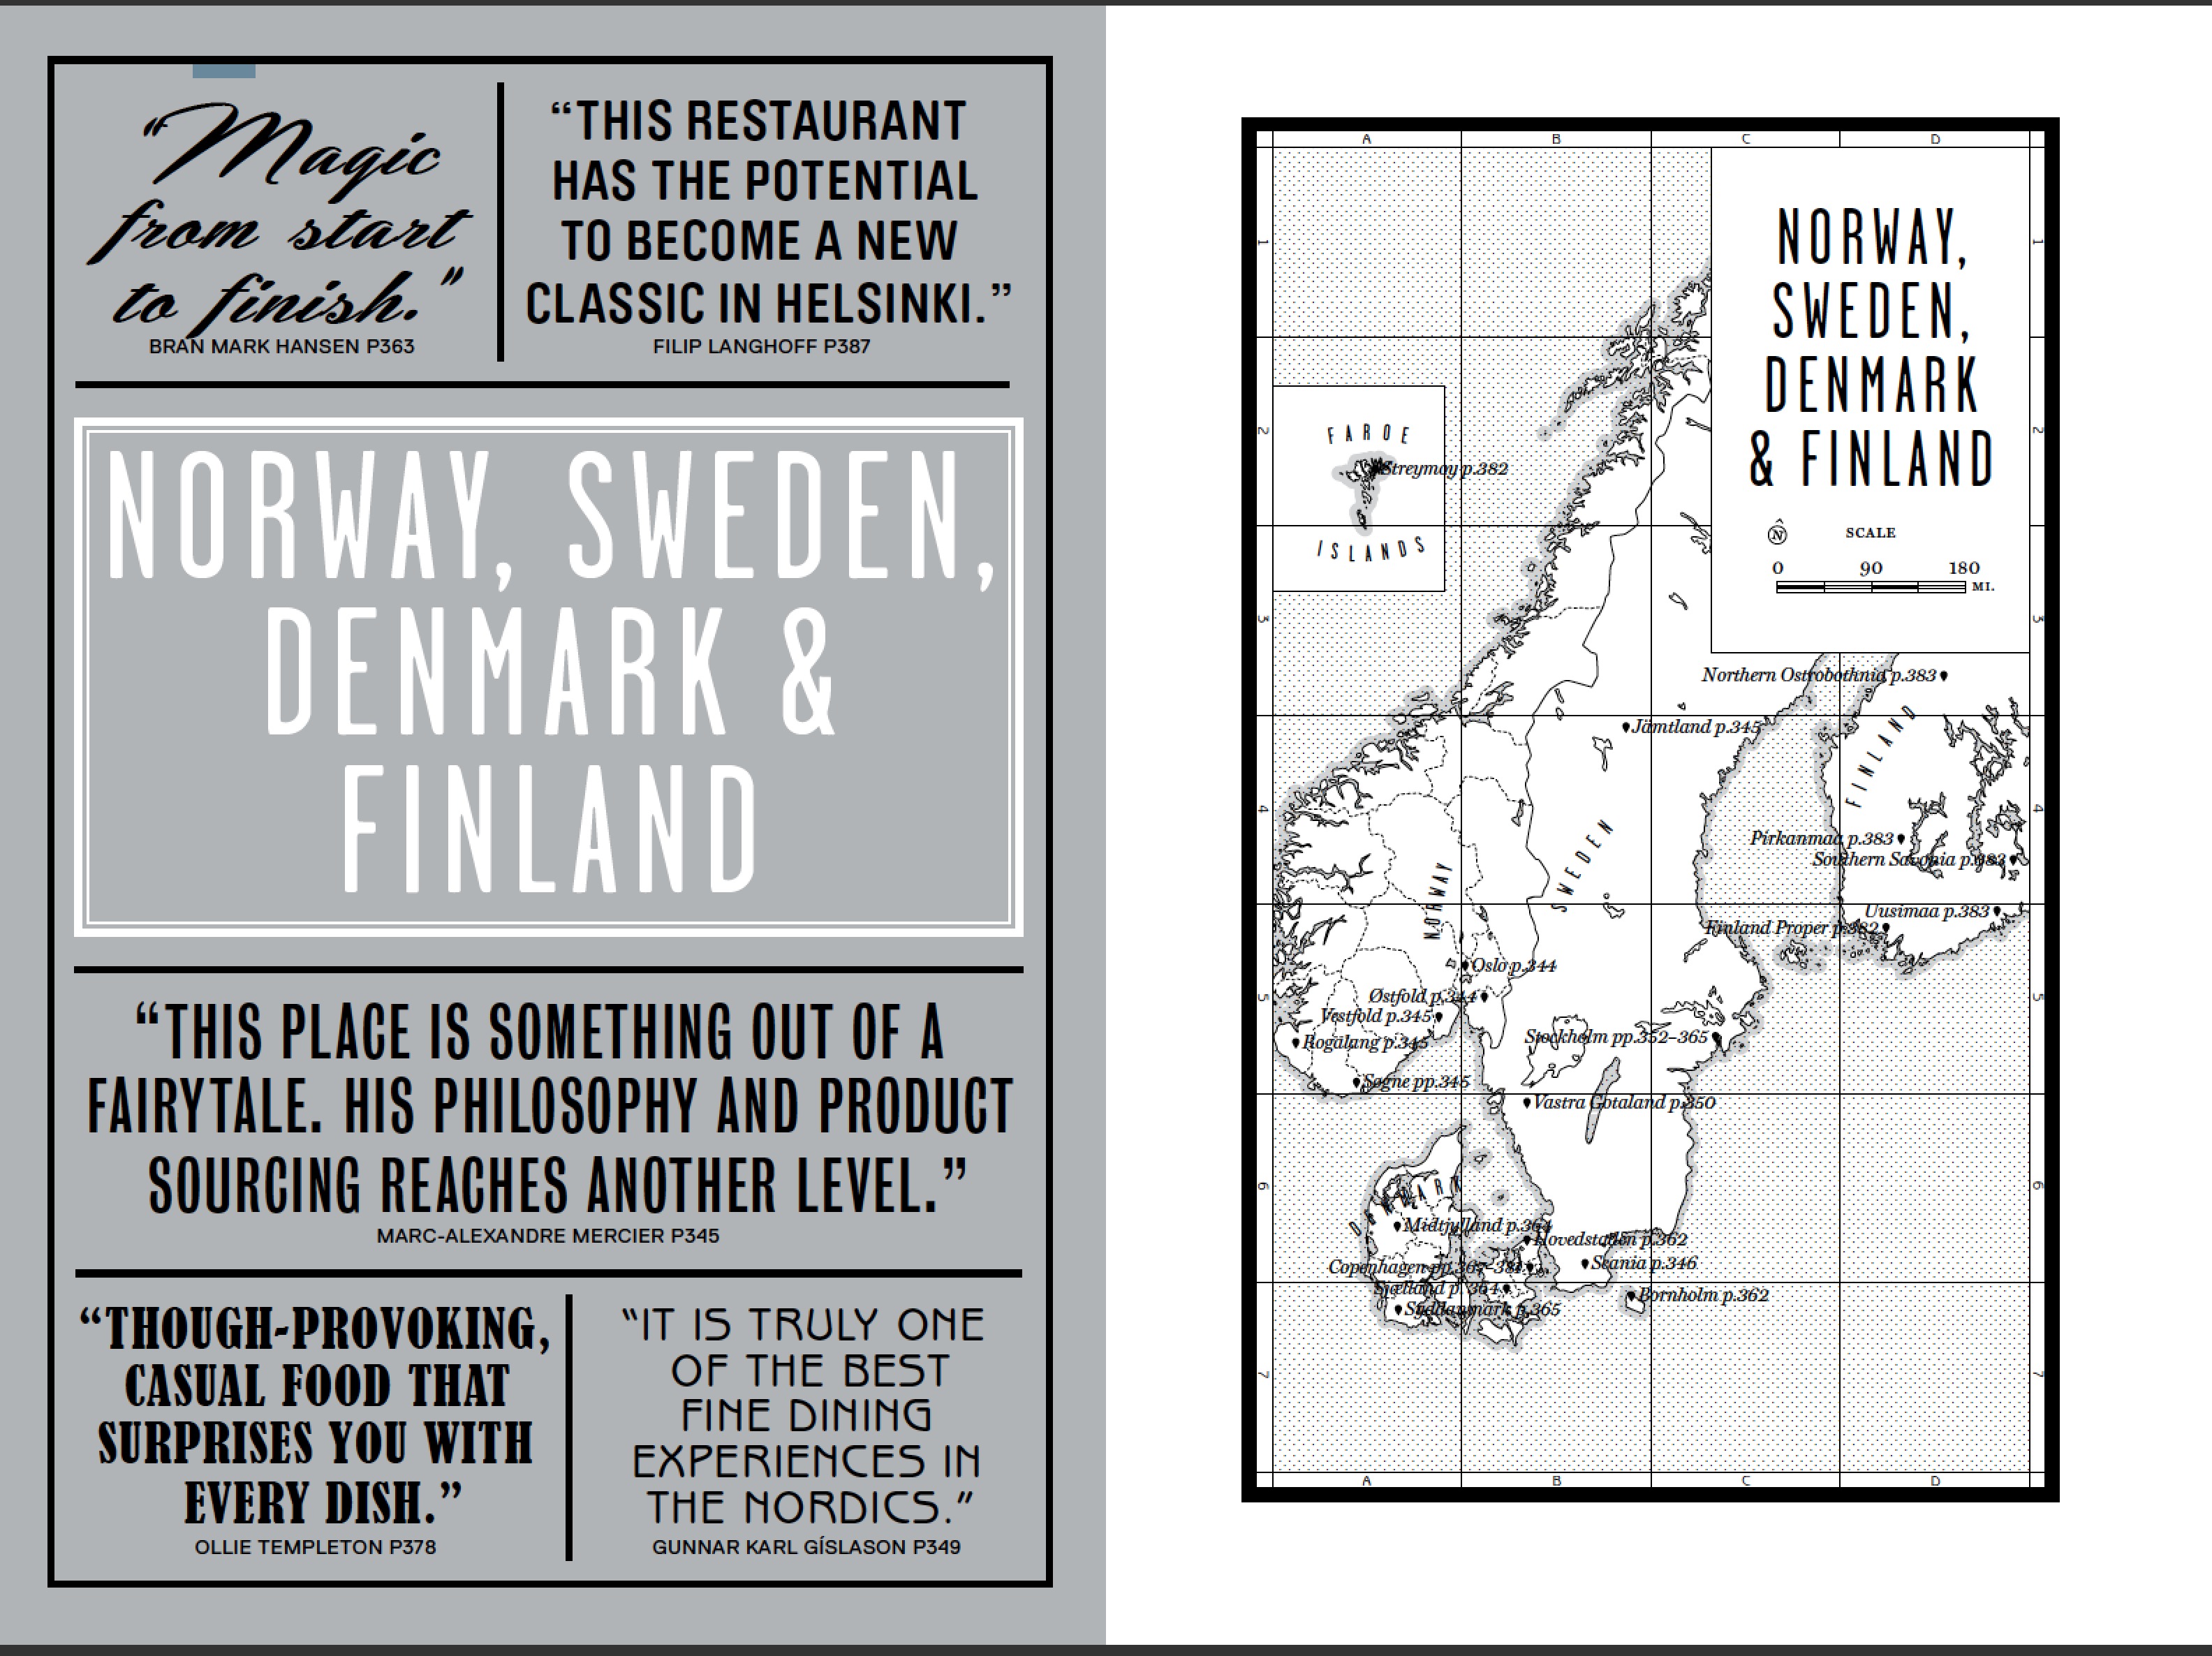 The Norway, Sweden, Denmark and Finland introduction to our book Where Chefs Eat